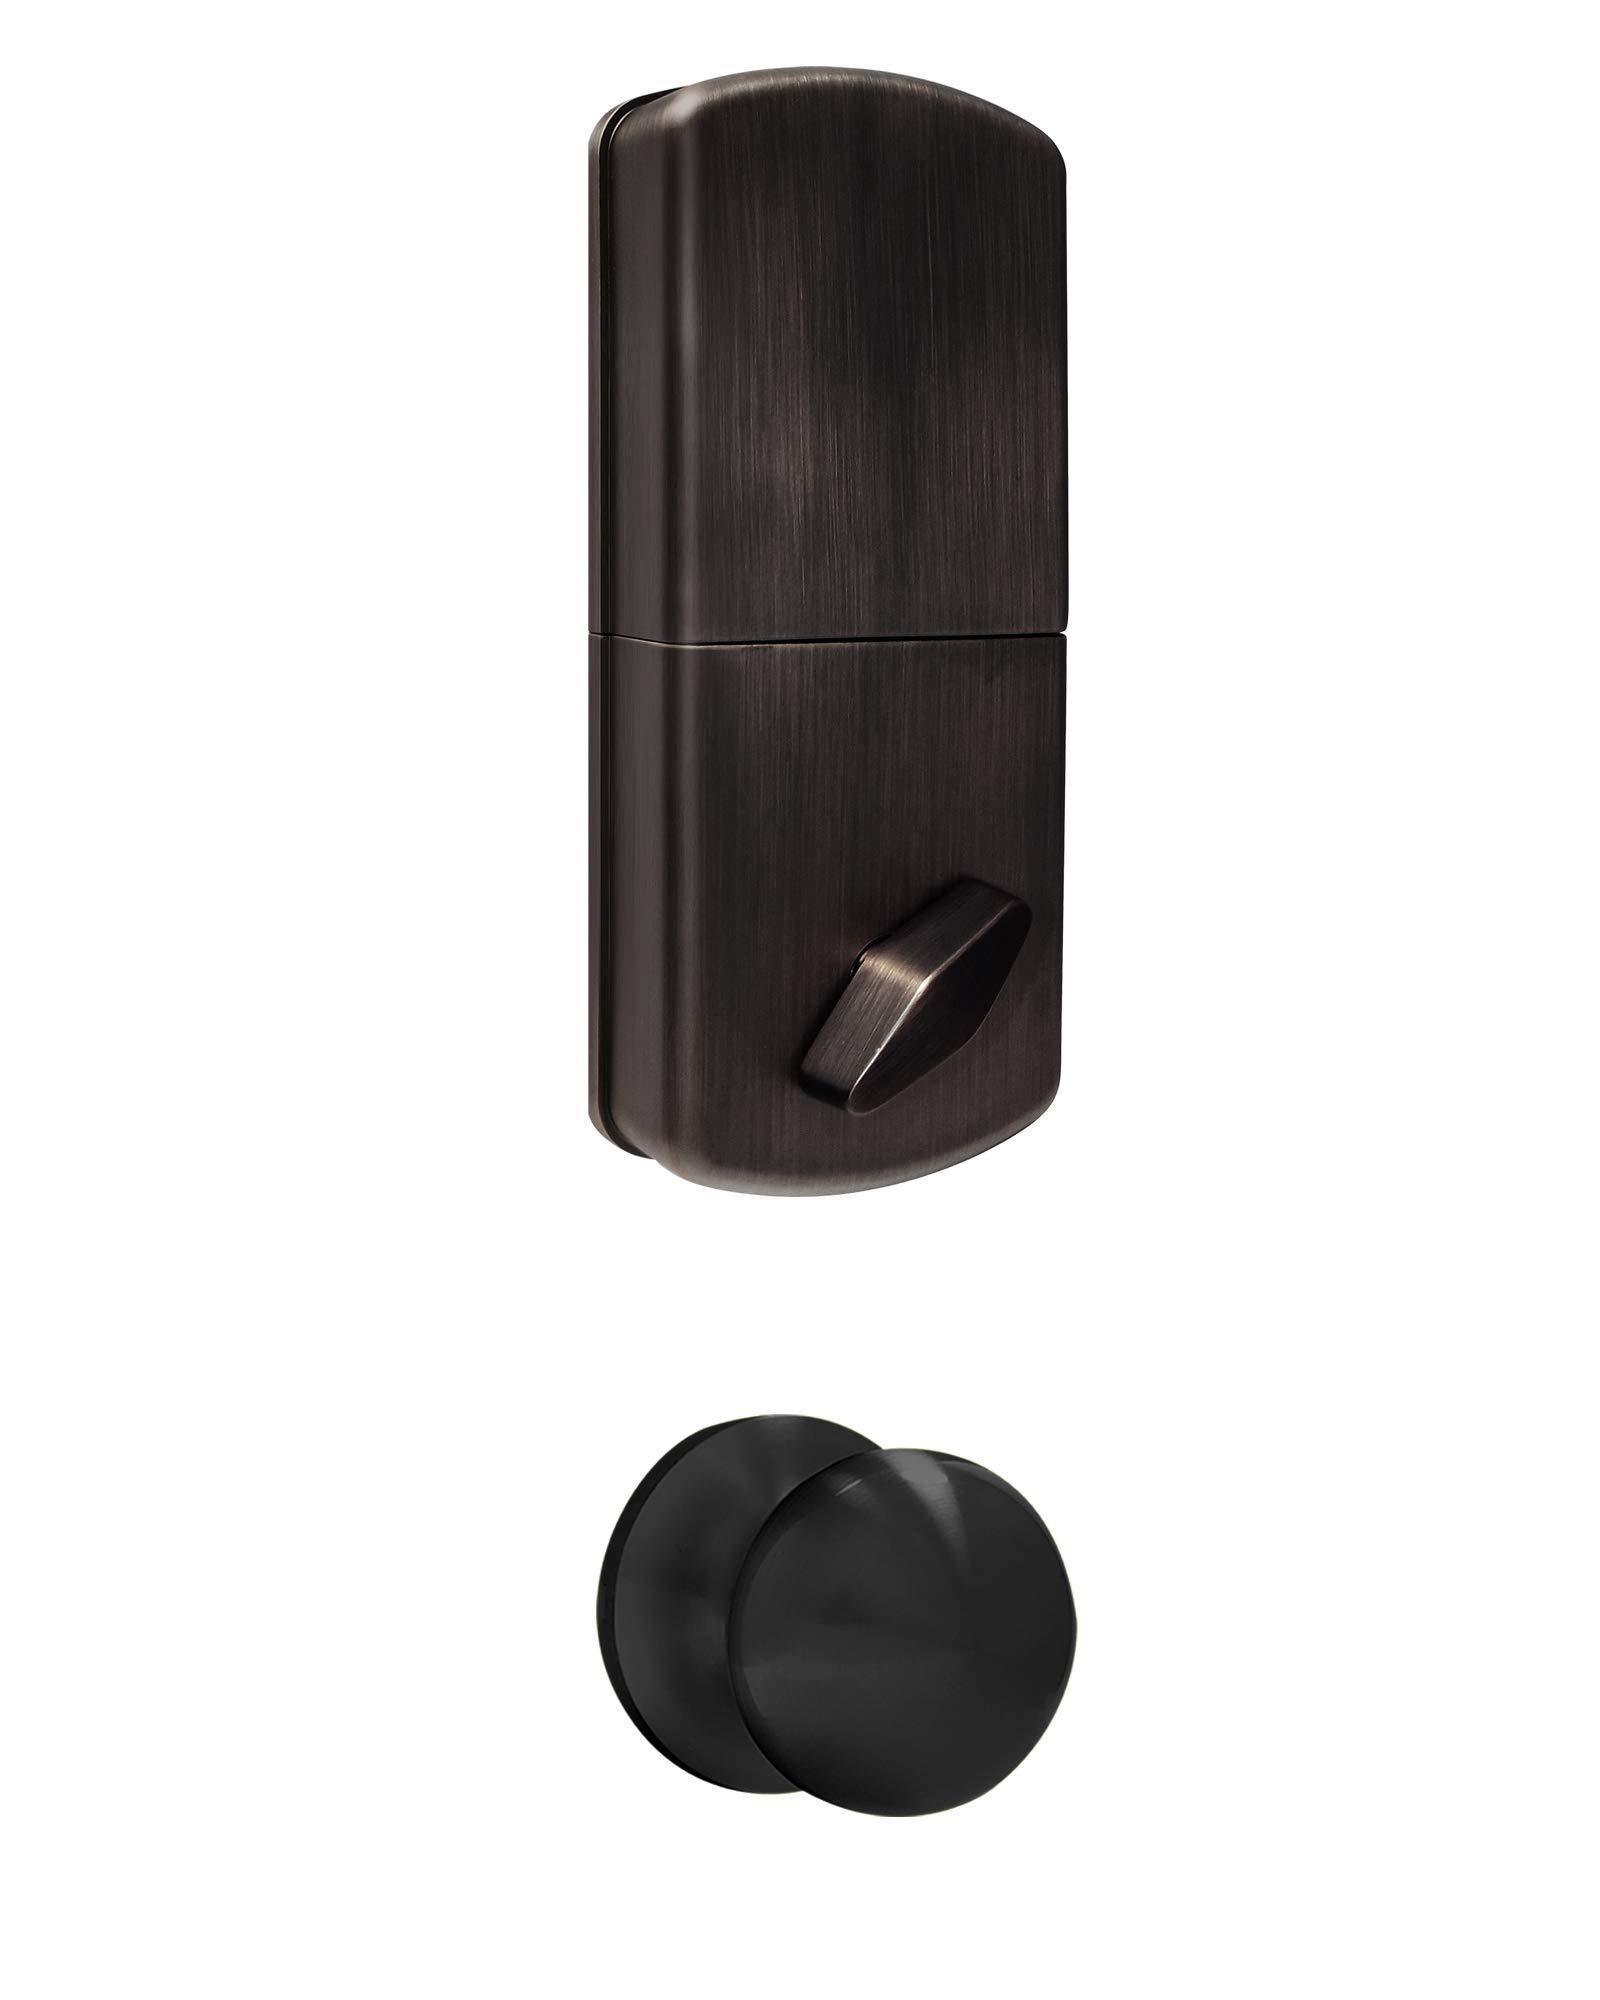 milocks dfk-02ob electronic touchpad entry keyless deadbolt and passage knob combo, oil rubbed bronze